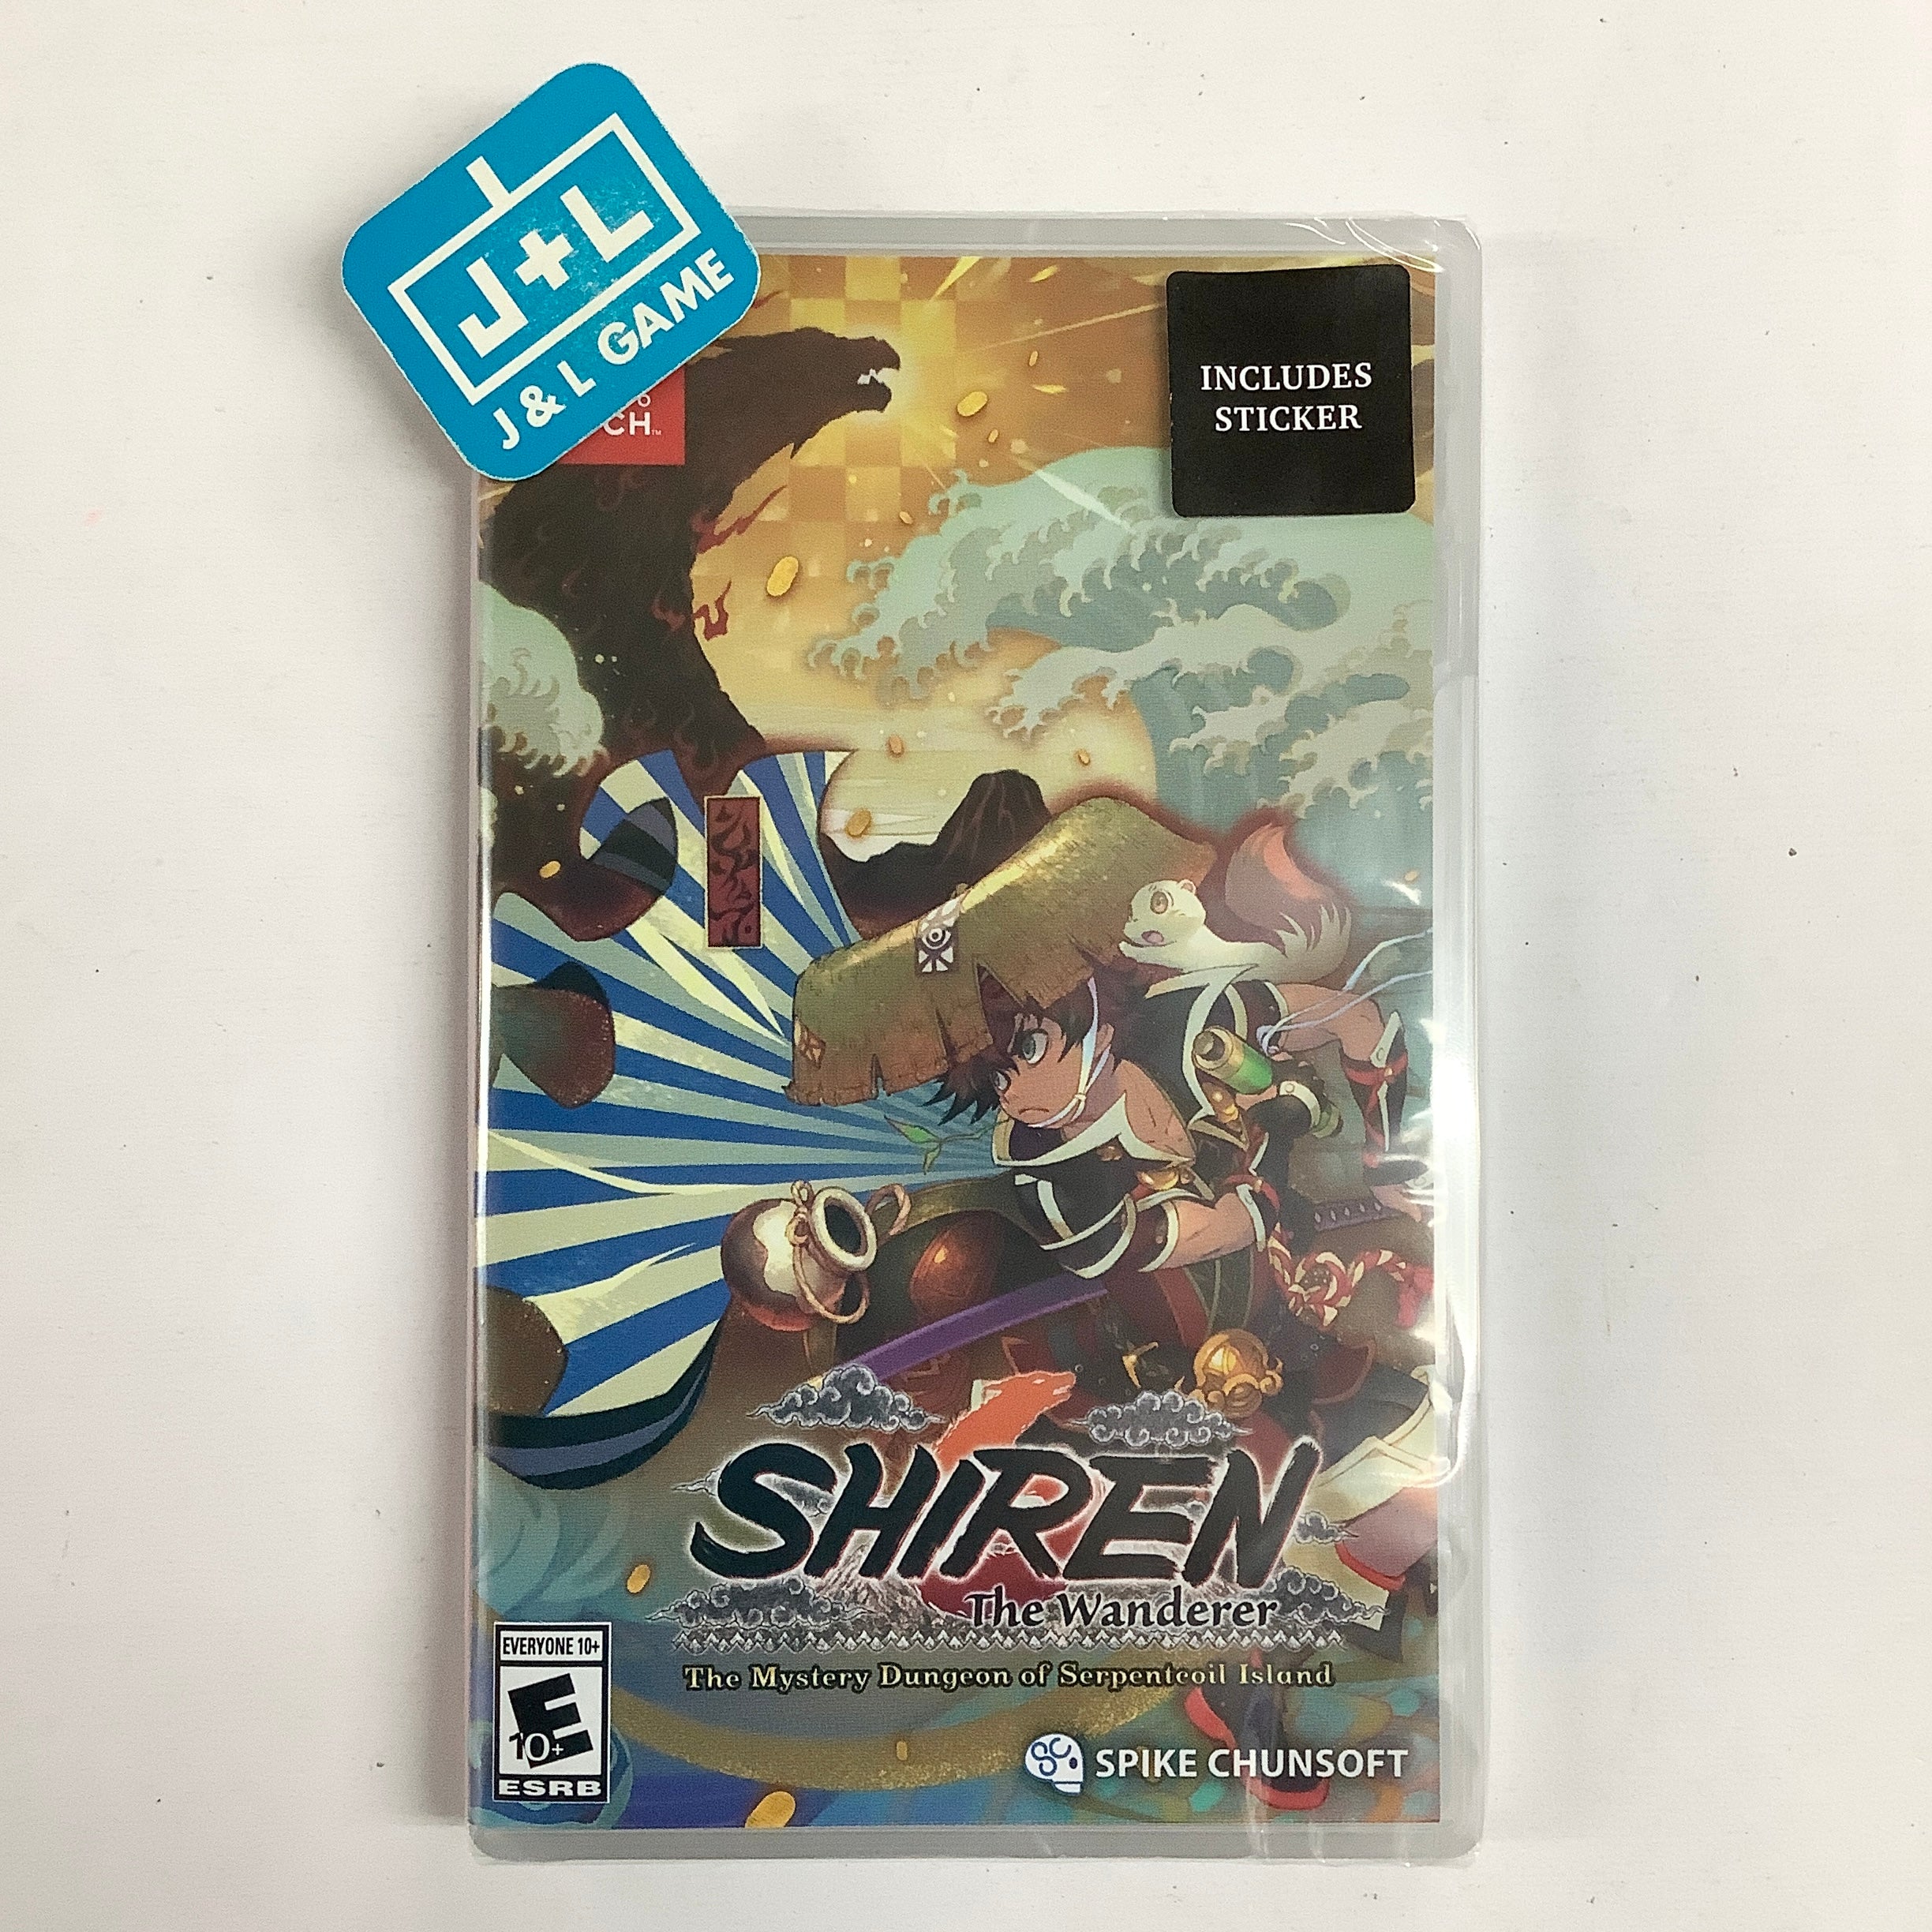 Shiren the Wanderer: The Mystery Dungeon of Serpentcoil Island - (NSW) Nintendo Switch Video Games Spike Chunsoft   